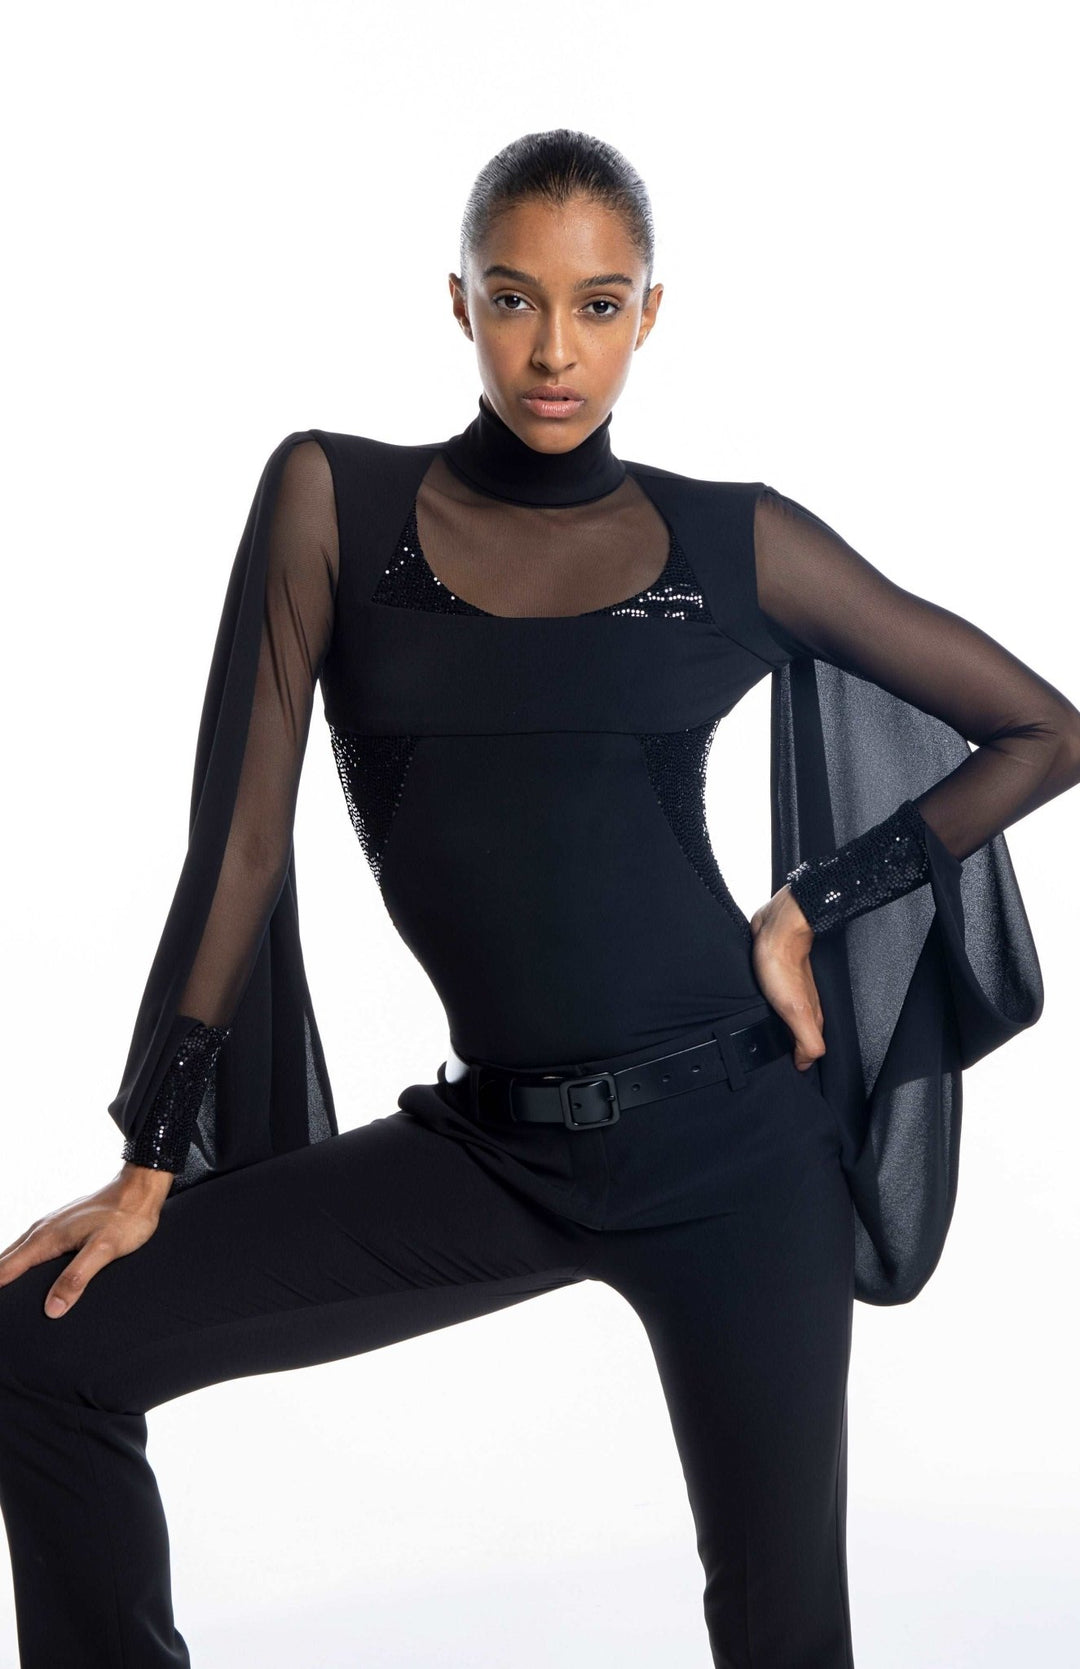 cool, black designer bodysuit with turtleneck, sheer neckline and sleeves, draped cape, and sequin contrast panels.